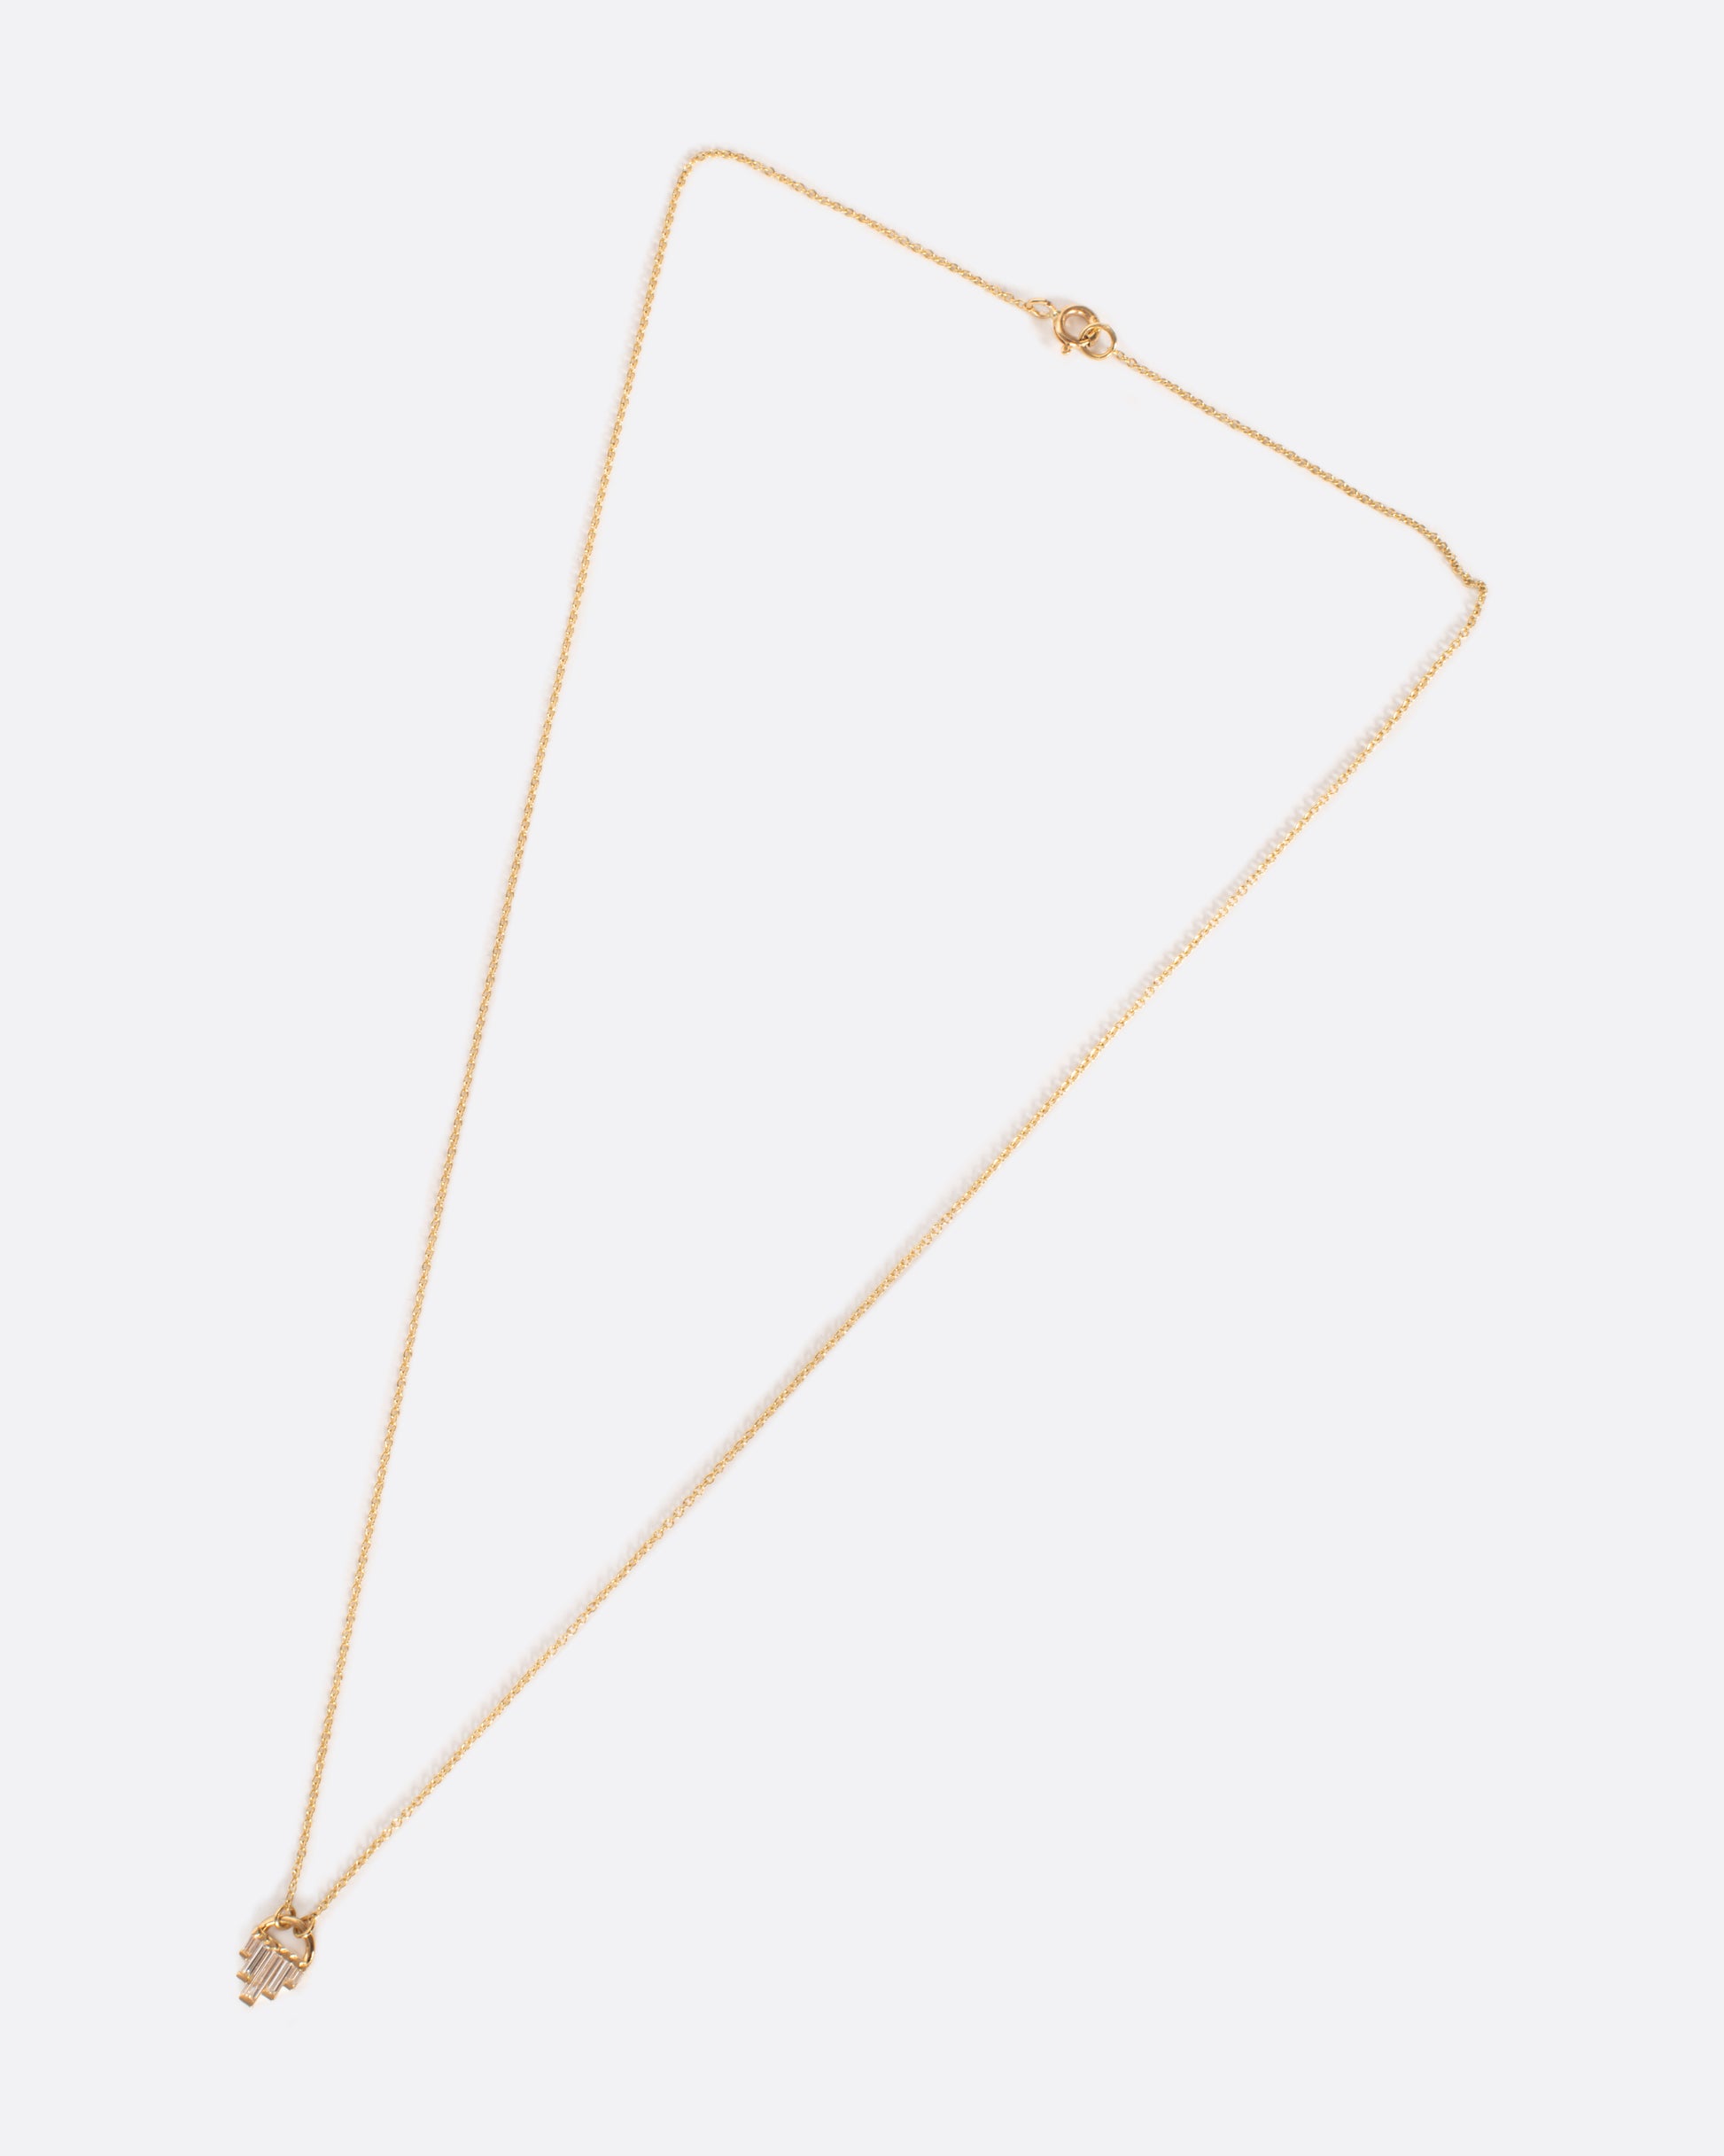 A curved gold pendant necklace with gradient in size baguette diamonds.